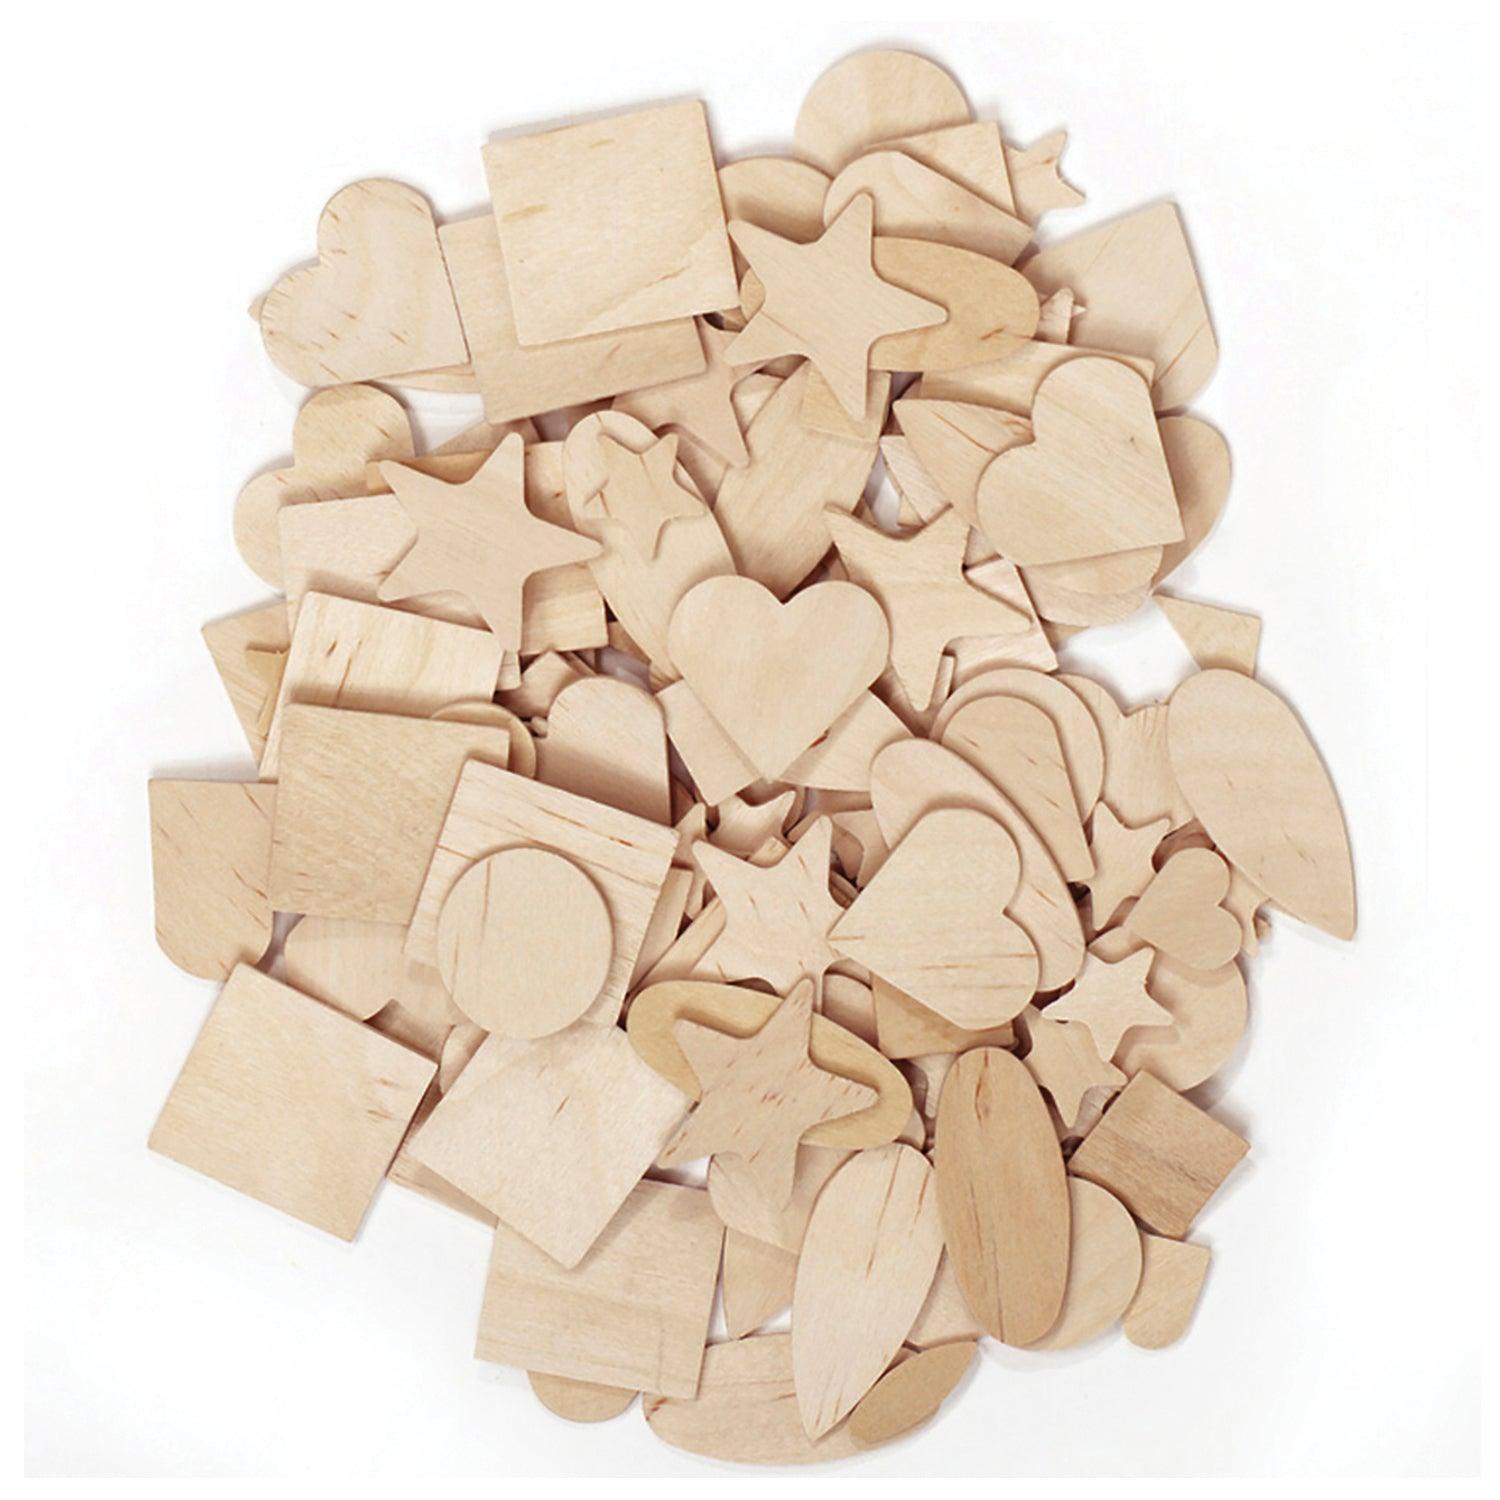 Wood Shapes, Natural Colored, Assorted Shapes, 1/2" to 2", 350 Per Pack, 2 Packs - Loomini